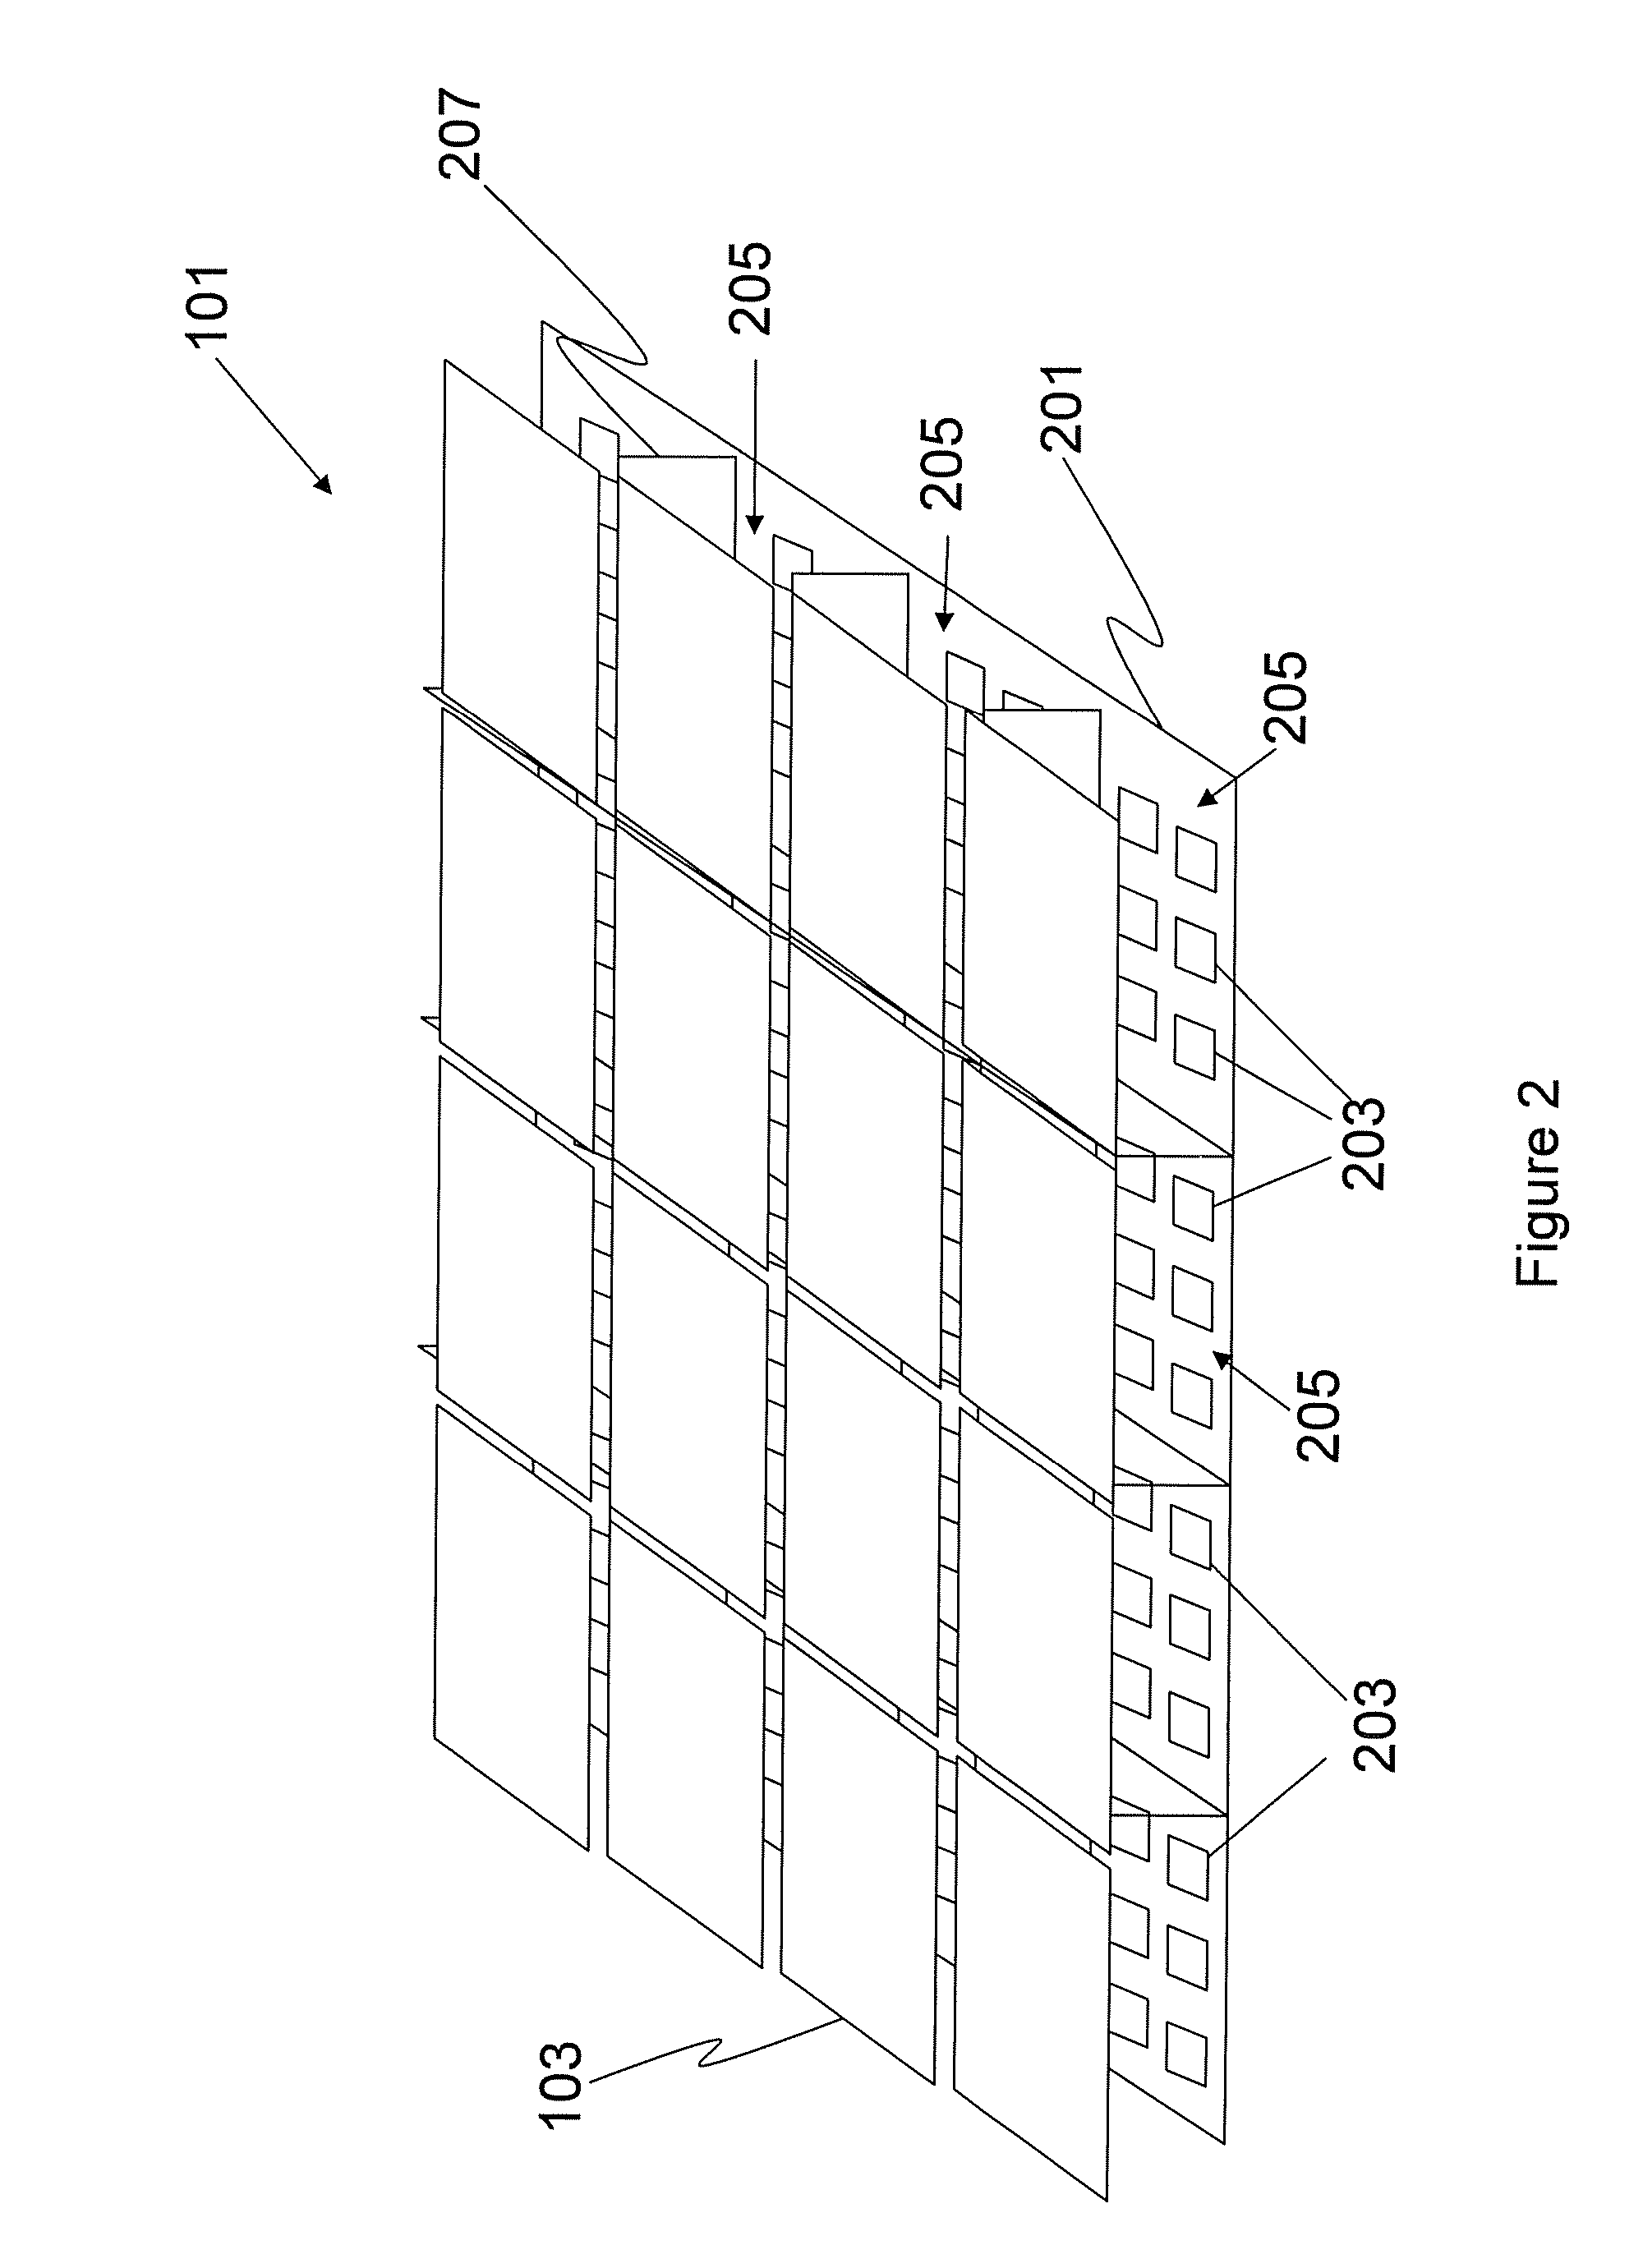 Backlit Display and Backlight System Thereof